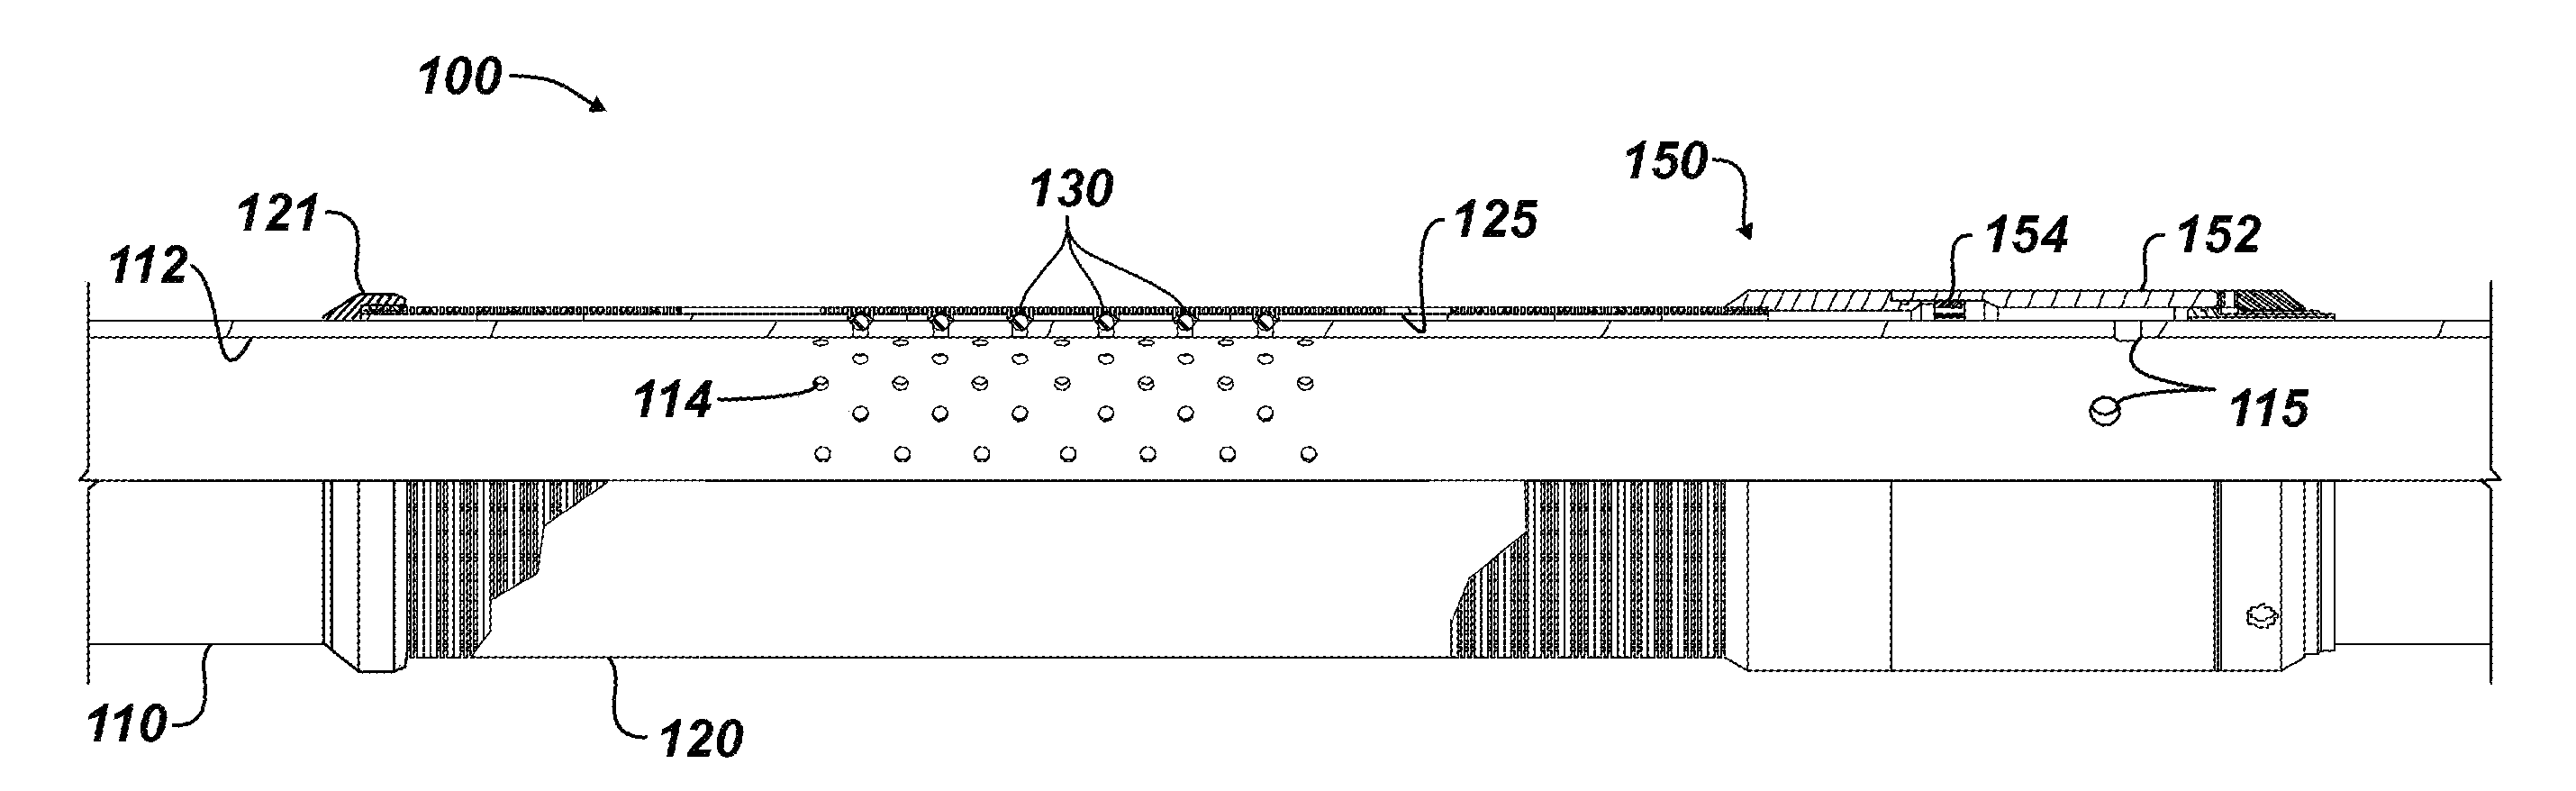 High-Rate Injection Screen Assembly with Checkable Ports